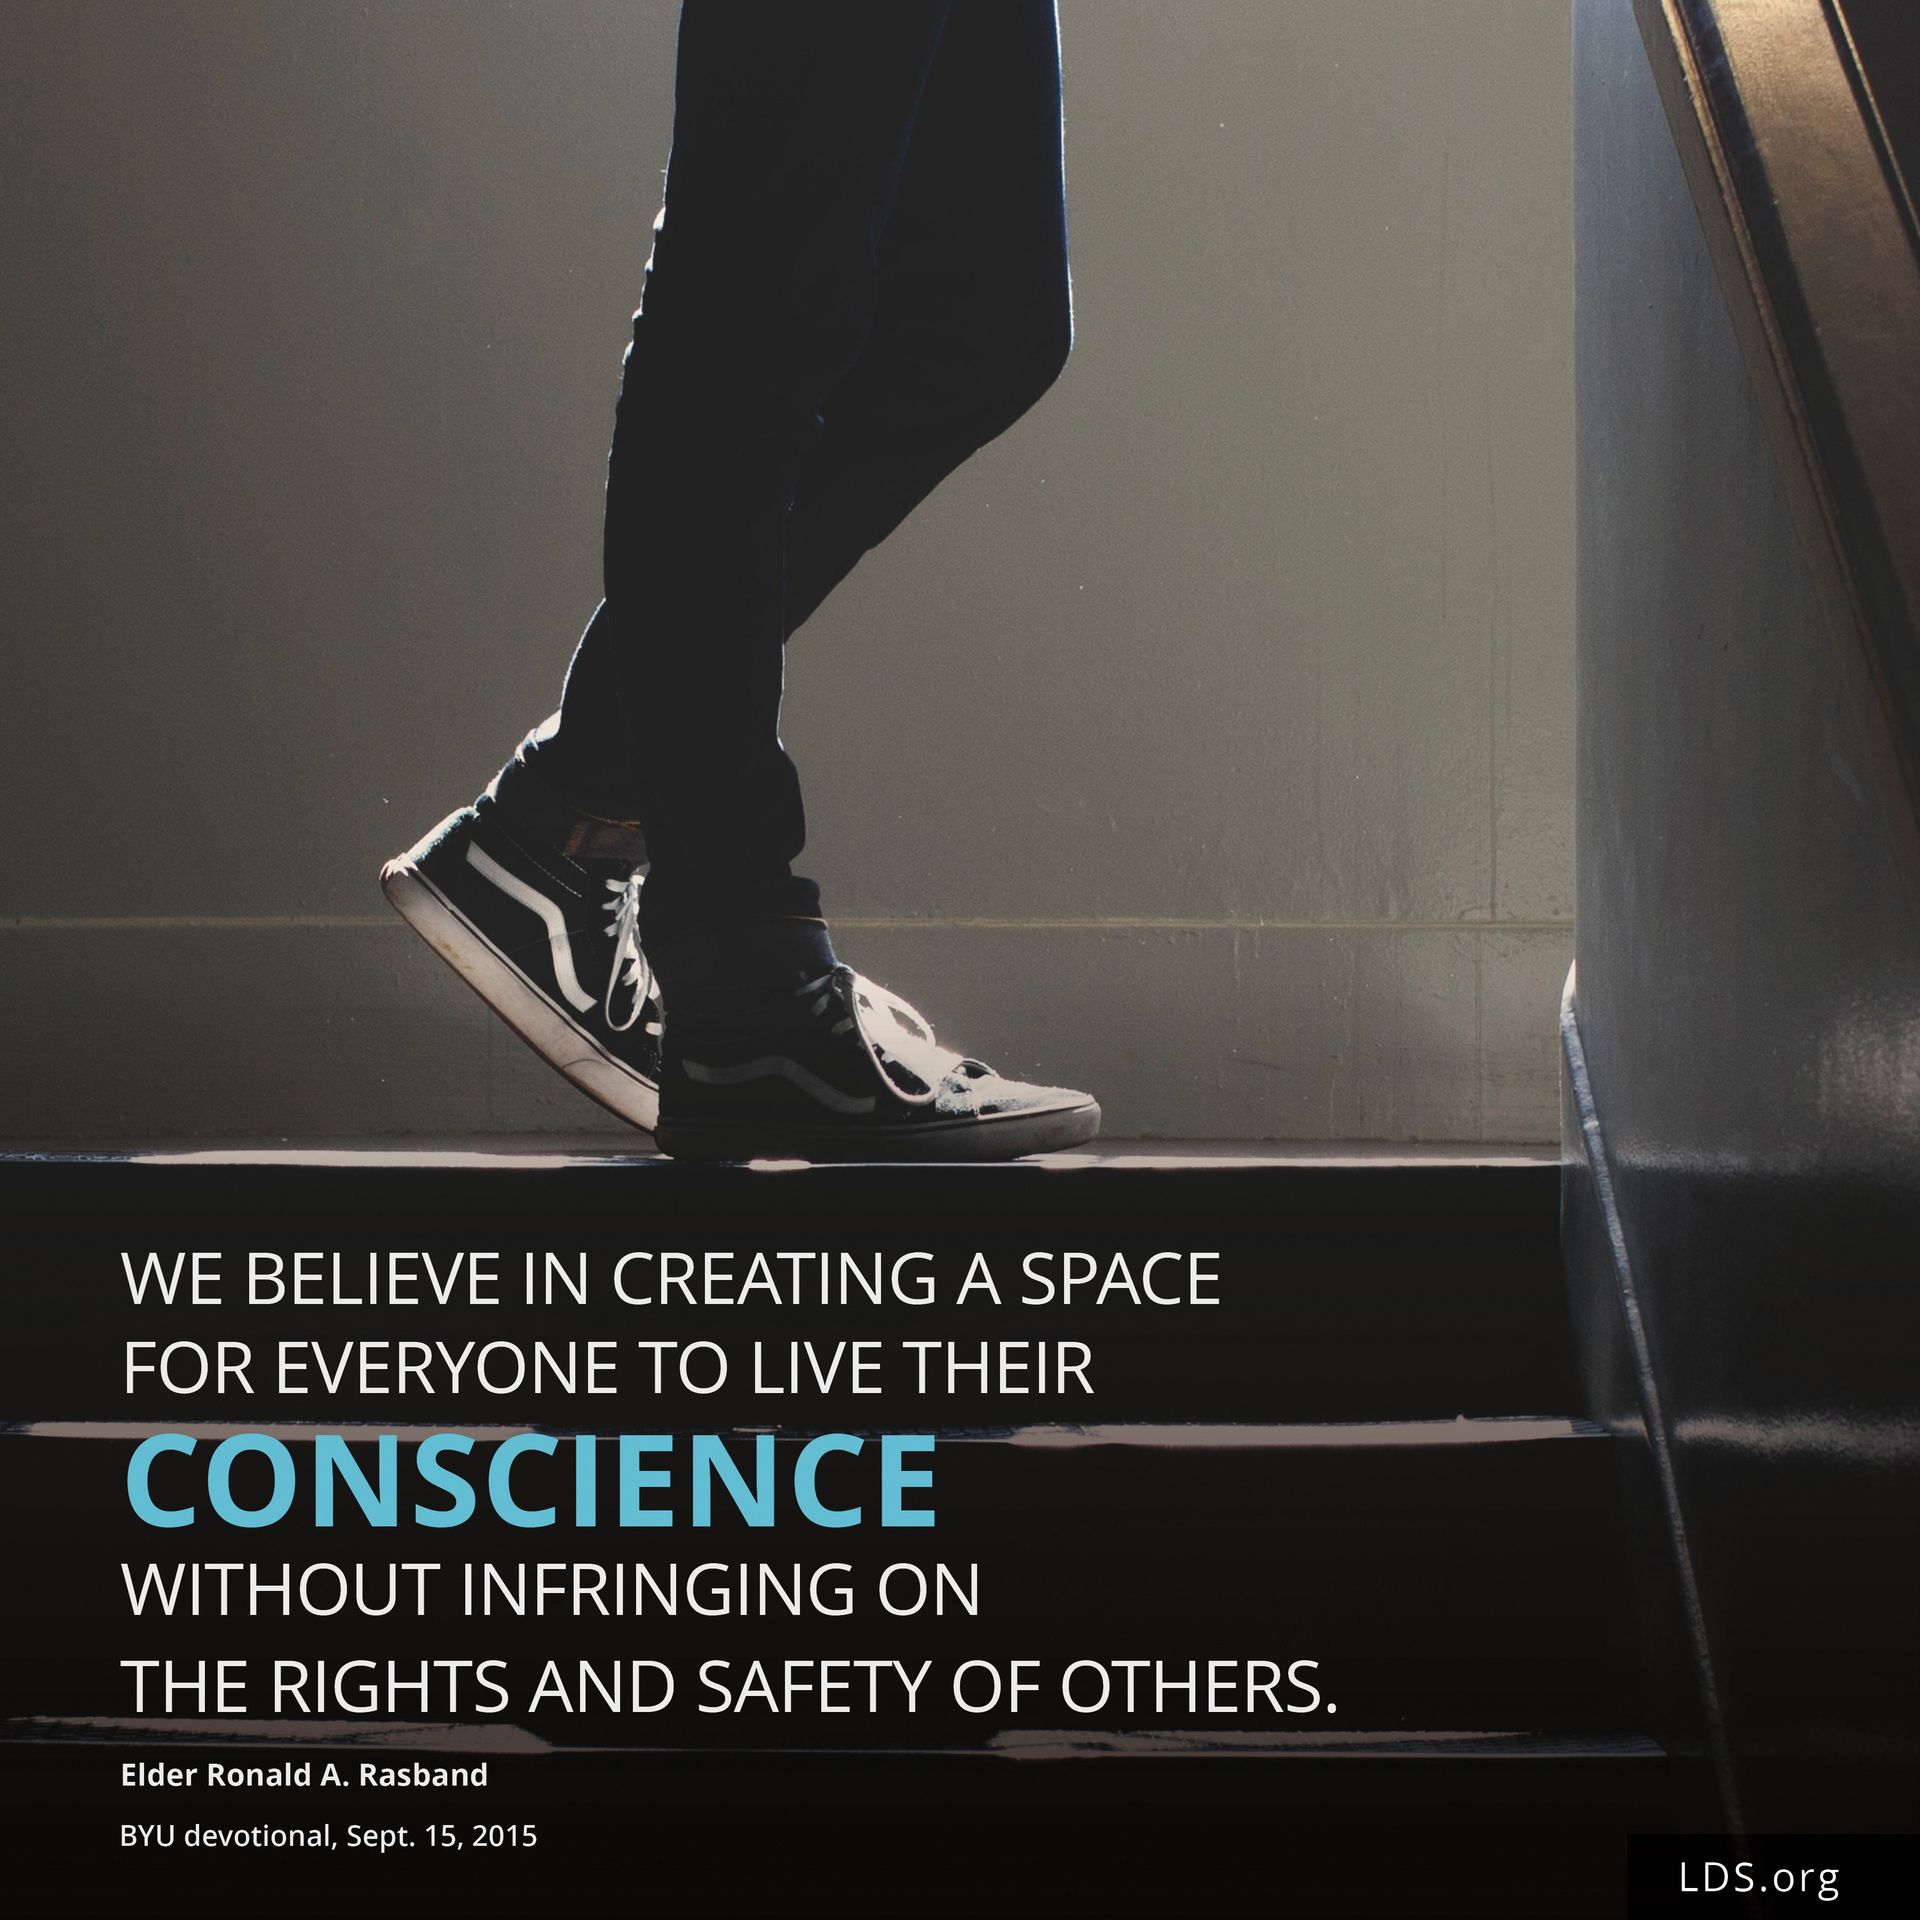 “We believe in creating a space for everyone to live their conscience without infringing on the rights and safety of others.”—Elder Ronald A. Rasband, BYU devotional, Sept. 15, 2015